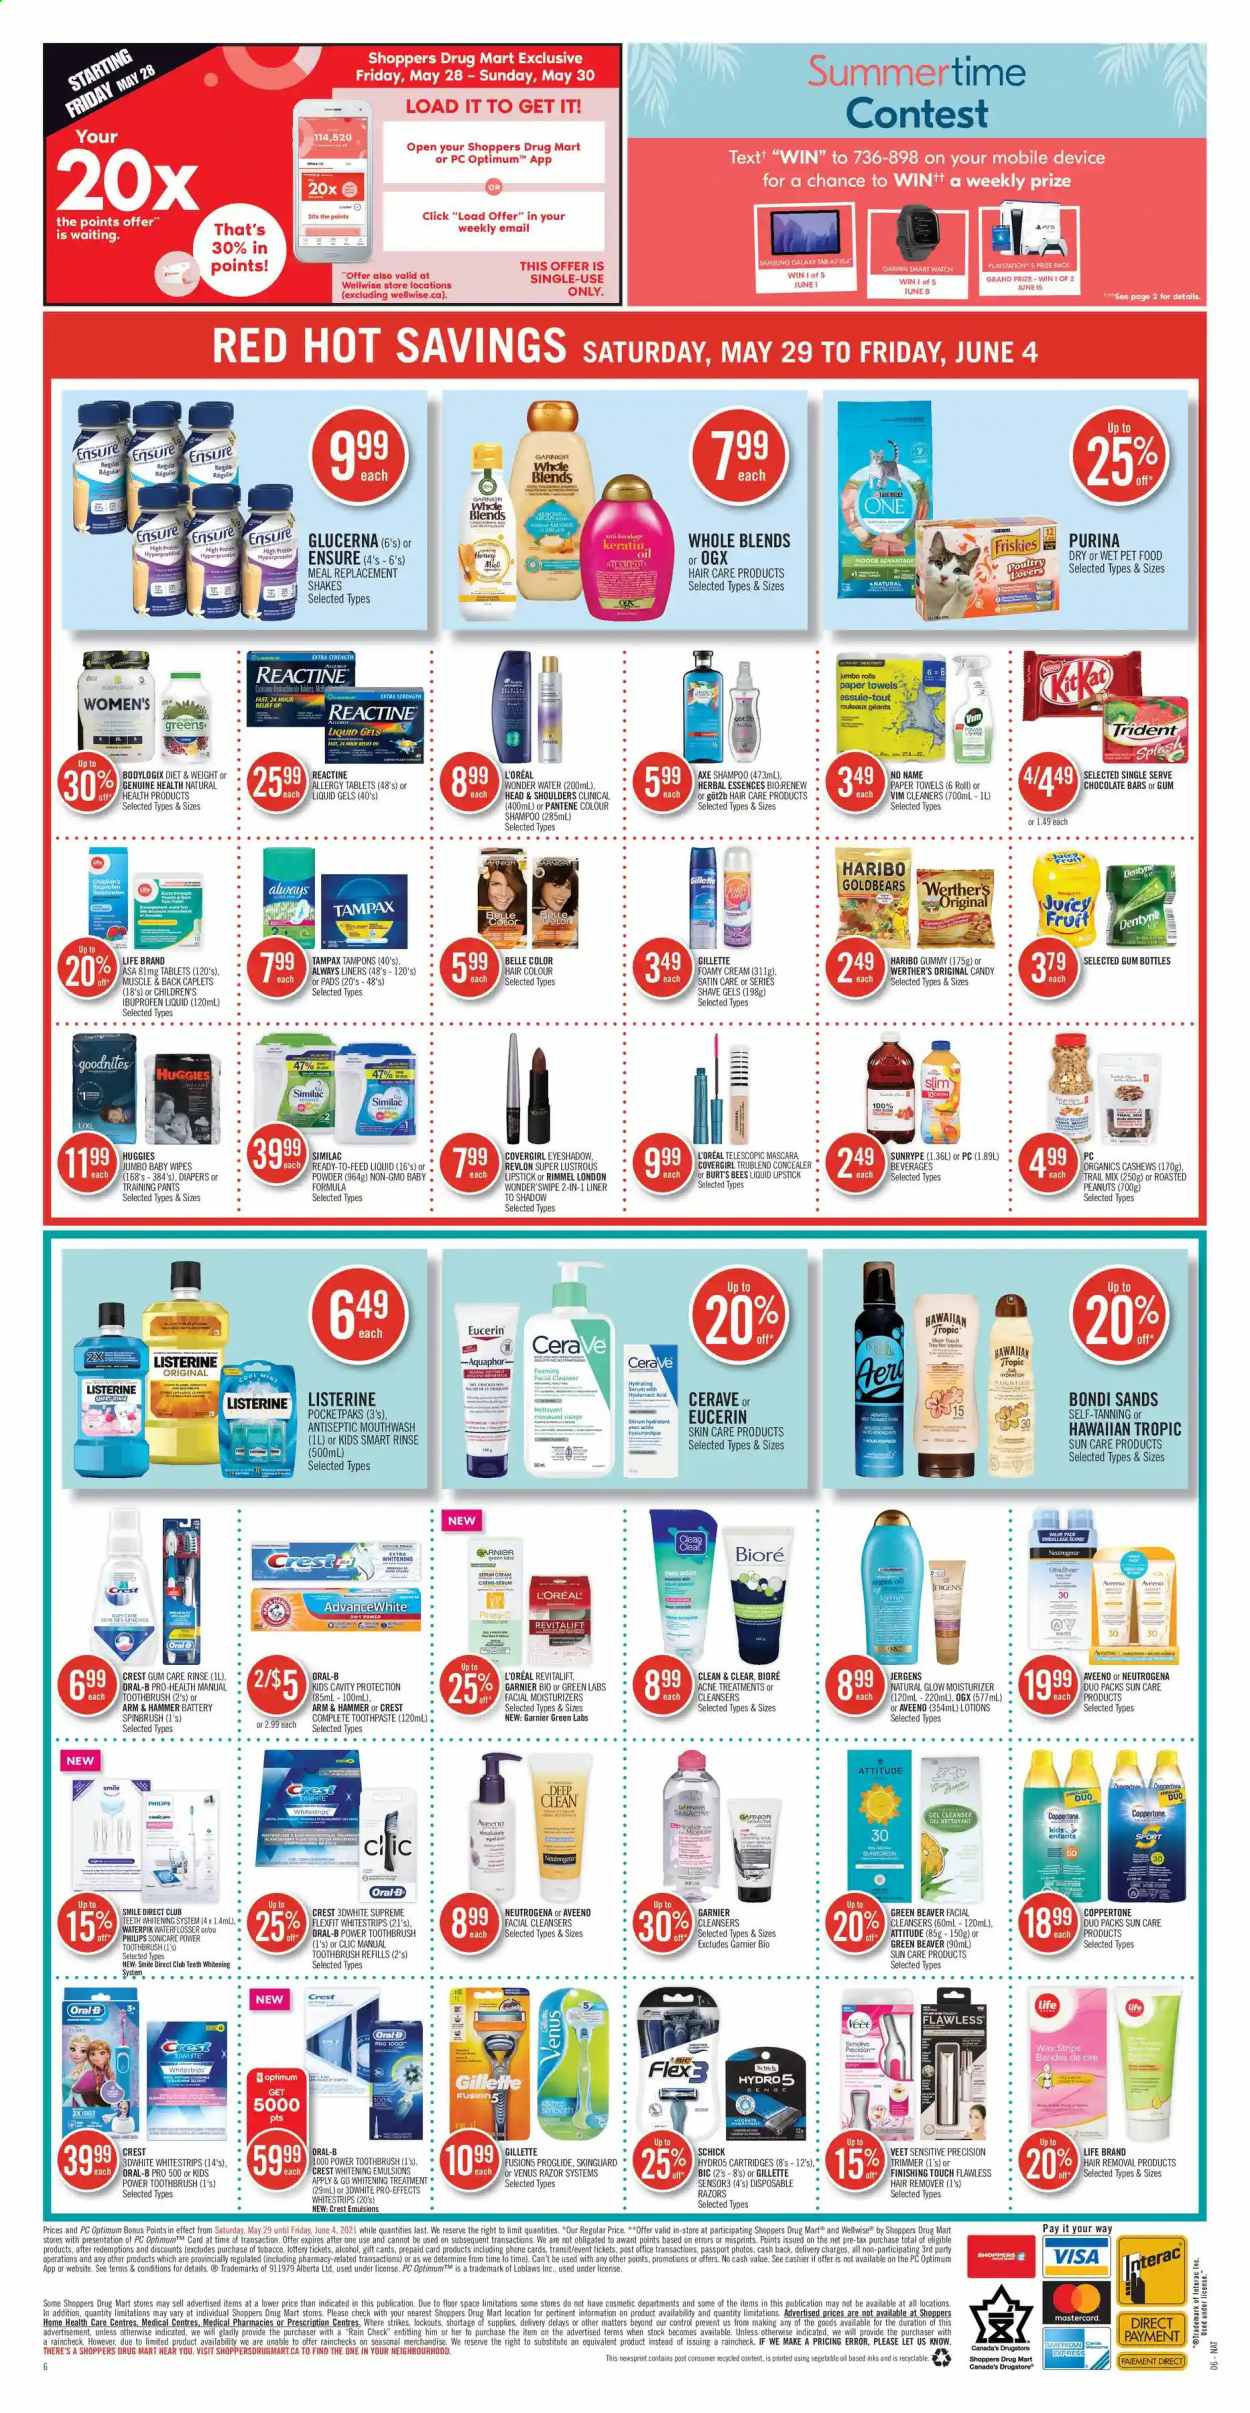 thumbnail - Shoppers Drug Mart Flyer - May 29, 2021 - June 04, 2021 - Sales products - Haribo, Trident, chocolate bar, ARM & HAMMER, vegetable oil, oil, cashews, roasted peanuts, peanuts, trail mix, Similac, wipes, pants, baby wipes, nappies, baby pants, Aquaphor, Aveeno, Always liners, kitchen towels, paper towels, toothbrush, toothpaste, mouthwash, Crest, tampons, CeraVe, cleanser, L’Oréal, moisturizer, serum, Bioré®, Clean & Clear, Bondi Sands, OGX, Revlon, hair color, Herbal Essences, keratin, Jergens, BIC, razor, Schick, Venus, hair removal, Veet, wax strips, disposable razor, trimmer, corrector, eyeshadow, lipstick, Rimmel, Sonicare, Ibuprofen, Glucerna, alcohol, Eucerin, Garnier, Gillette, Listerine, mascara, Neutrogena, shampoo, Tampax, Head & Shoulders, Huggies, Pantene, Oral-B. Page 12.